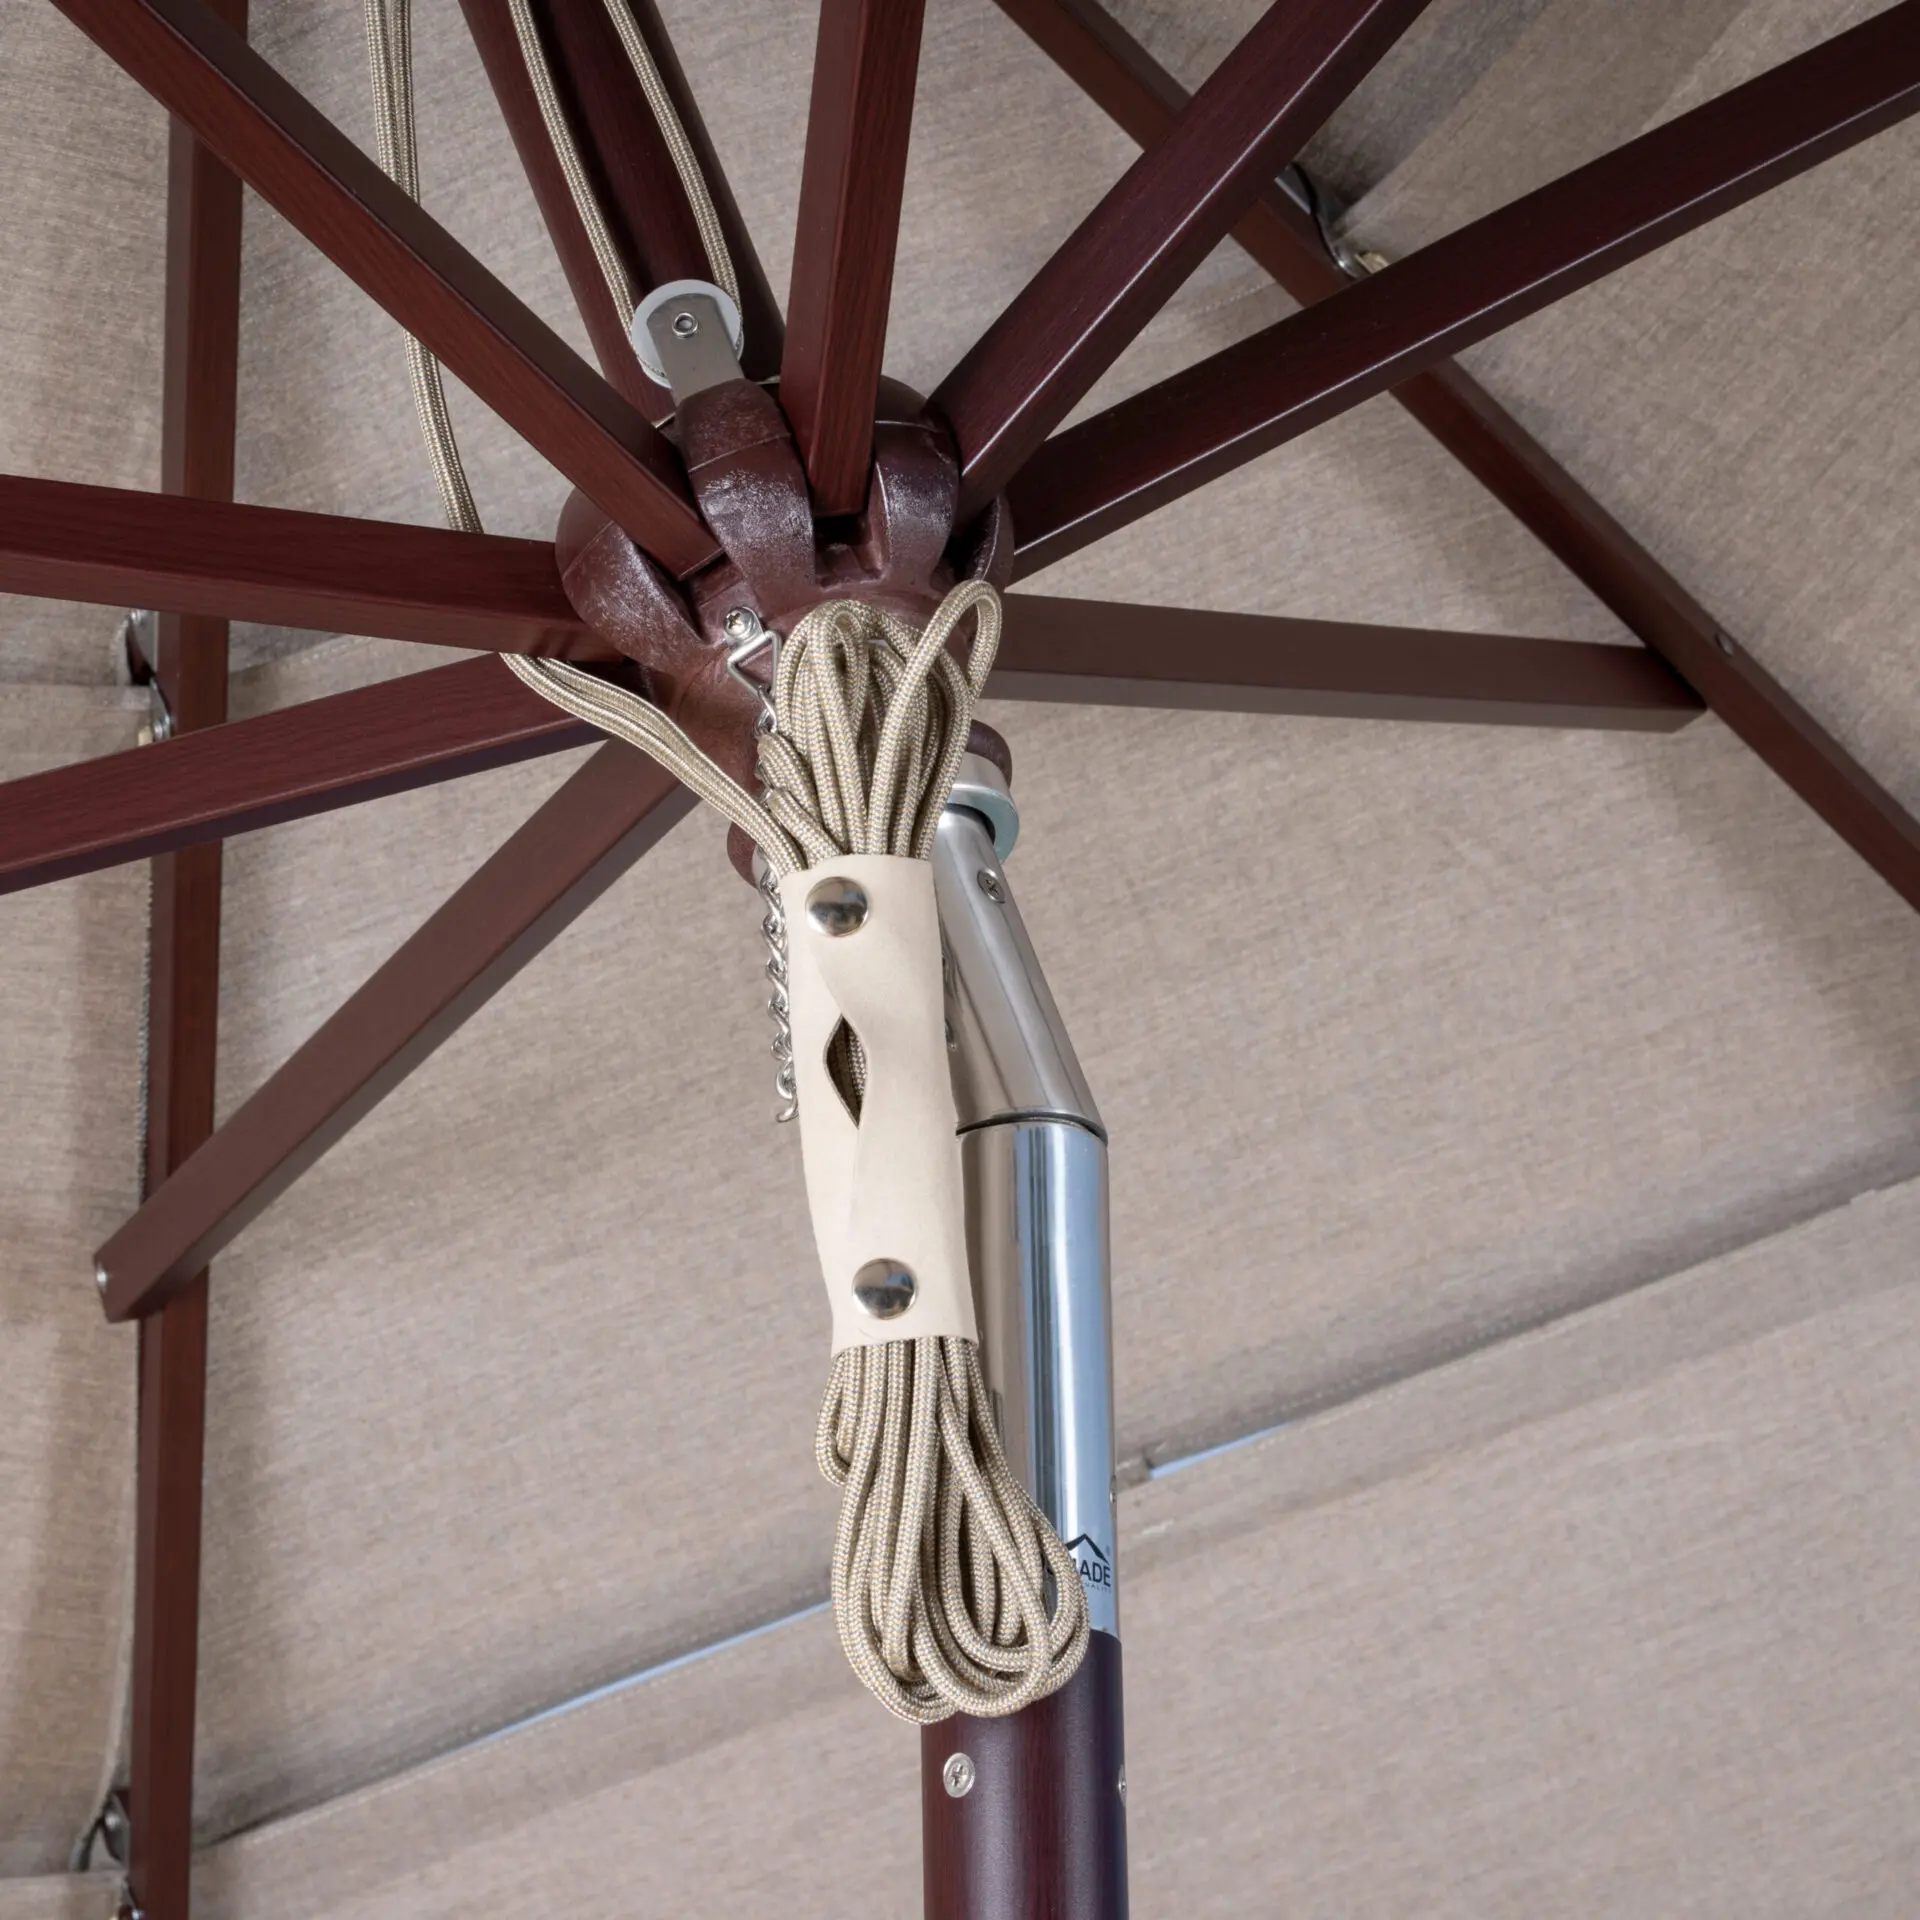 Eleven feet Market Umbrella Rope with Leather Pouch